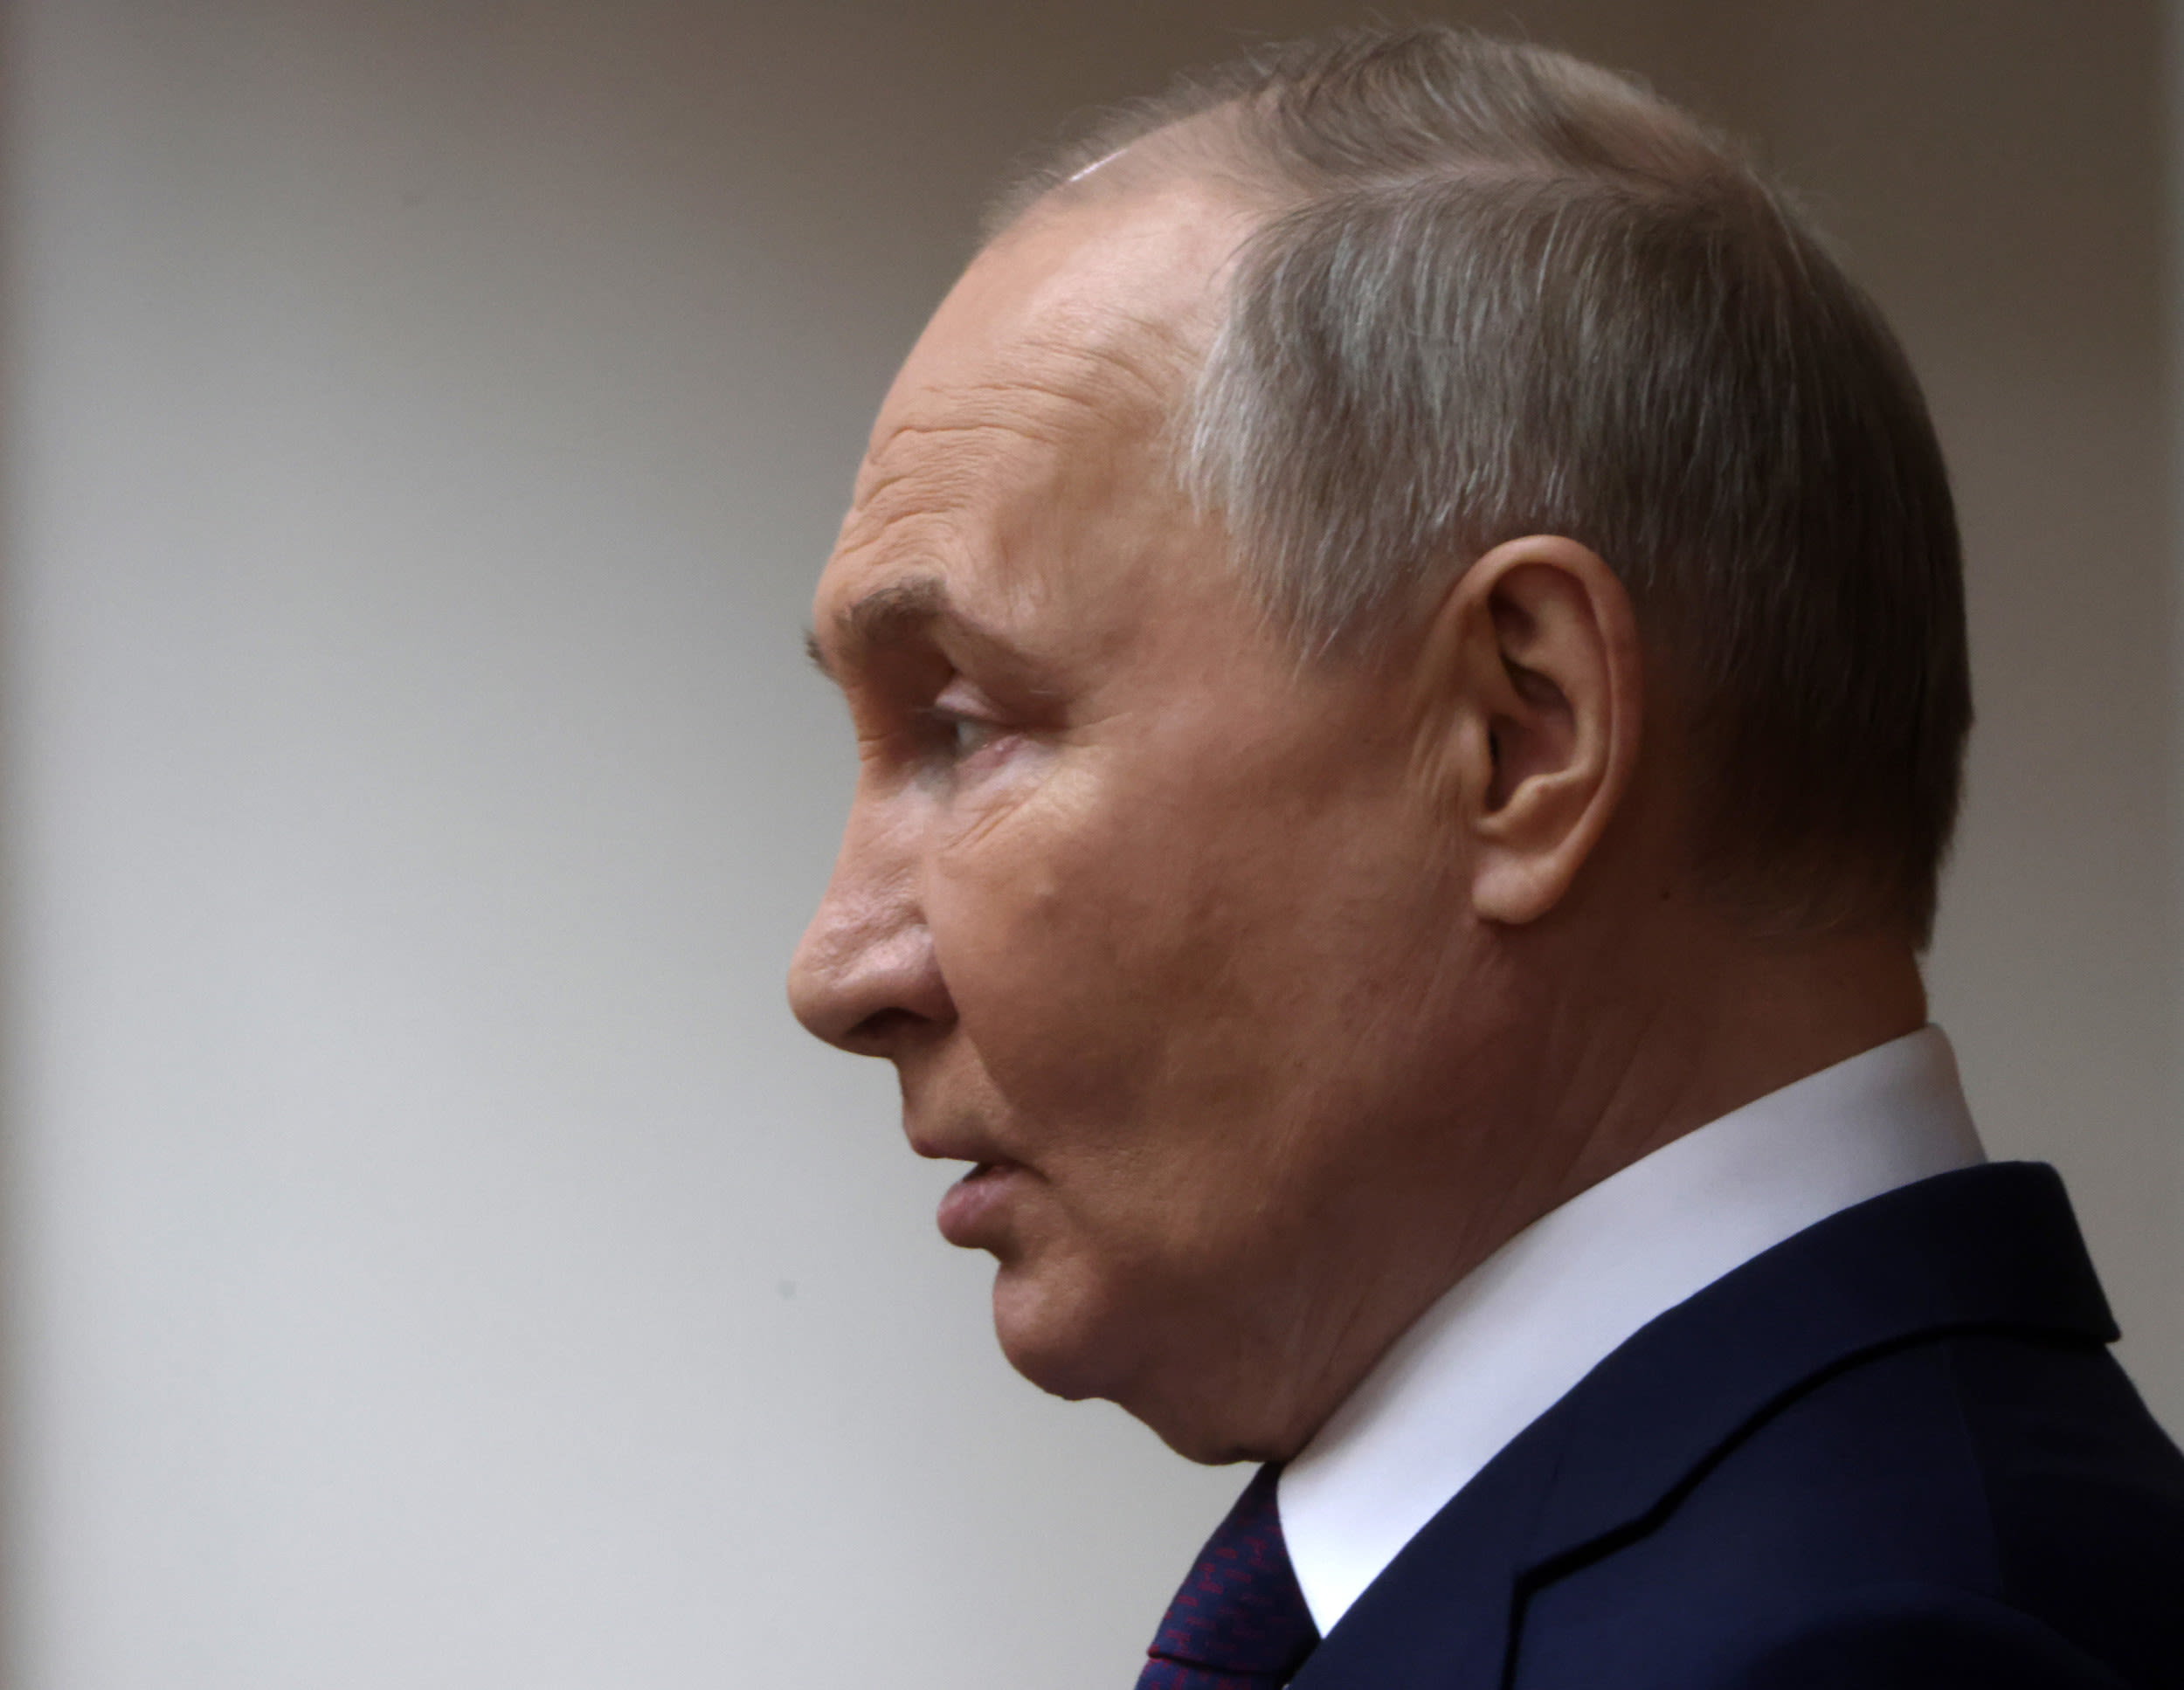 Putin orders tactical nuclear weapon drills citing "provocative statements"